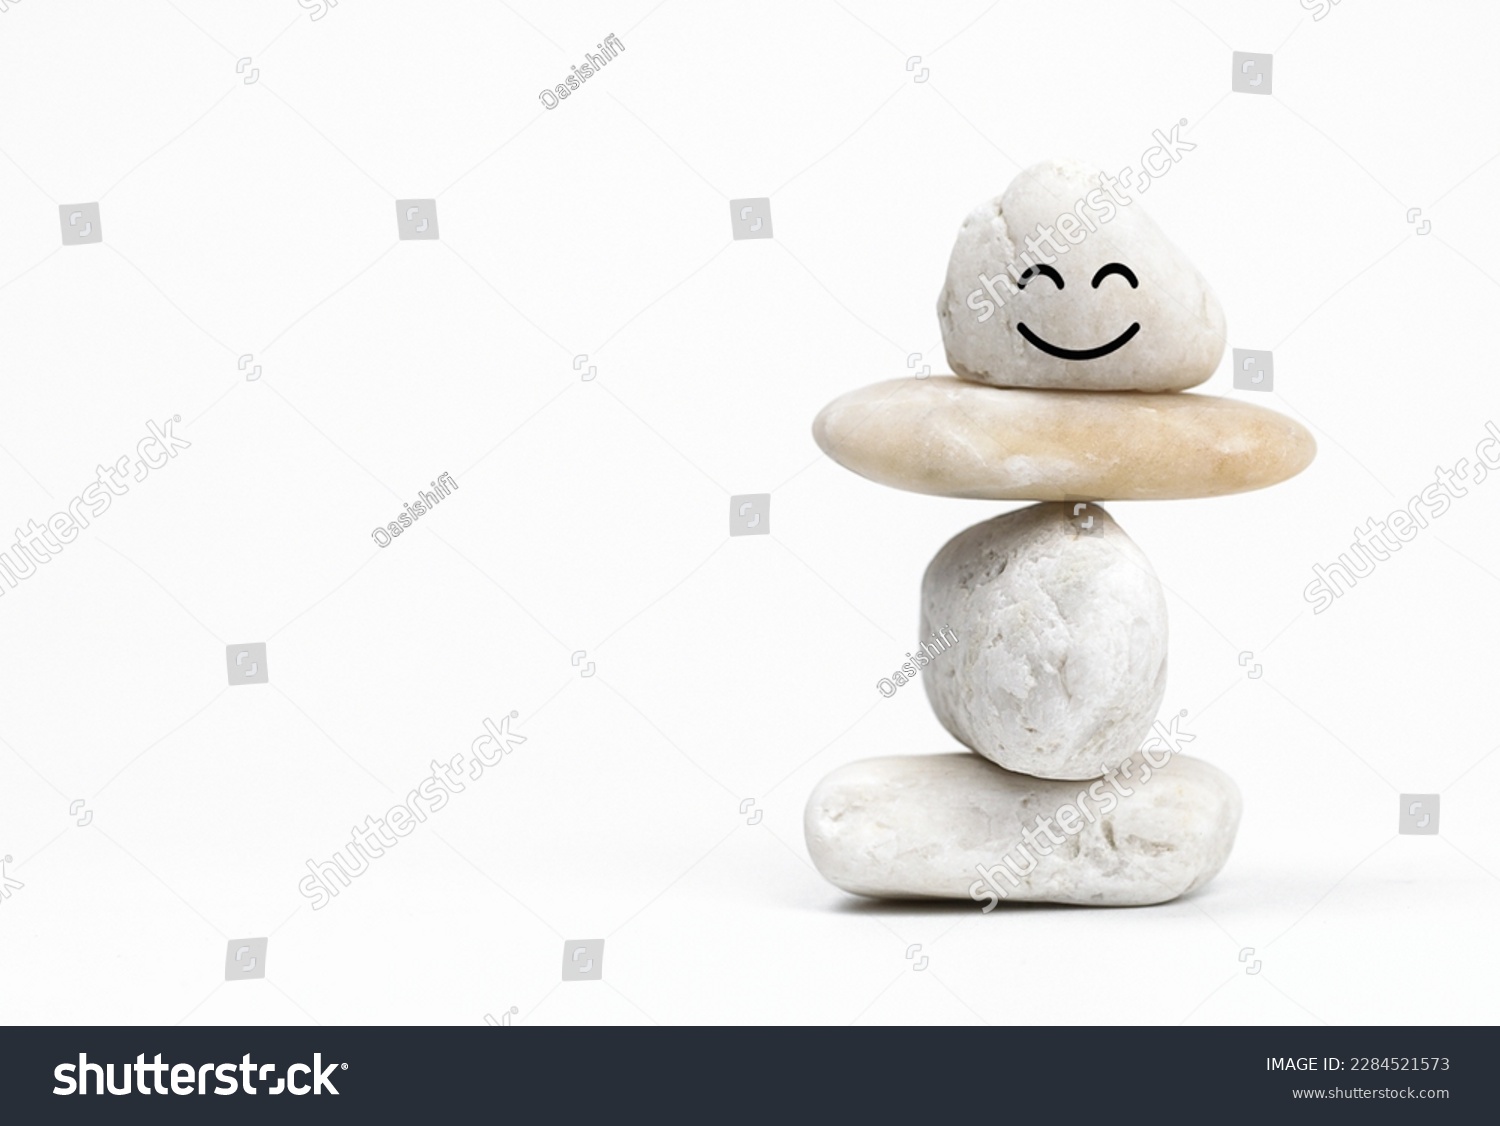 Positive Mind and  Harmony, Enjoying Life Concept, Hand Setting Natural Pebble Stone with Smiling Face Cartoon to Balance. Balancing Body, Mind, Soul and Spirit. Mental Health Practice.                #2284521573